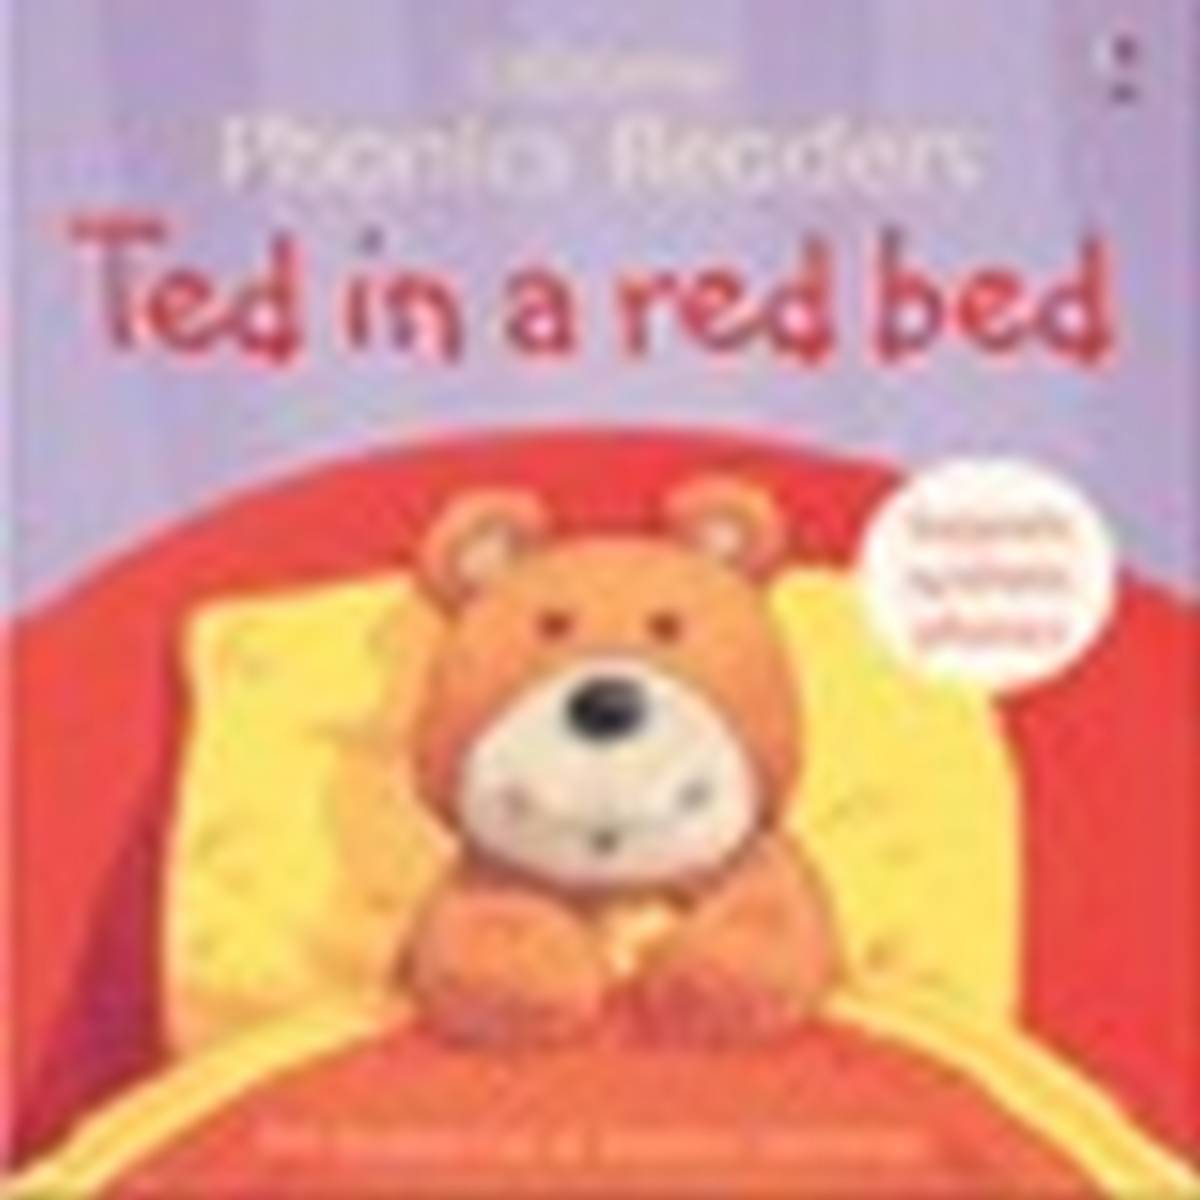 Ted in a Red Bed (Phonics Readers)